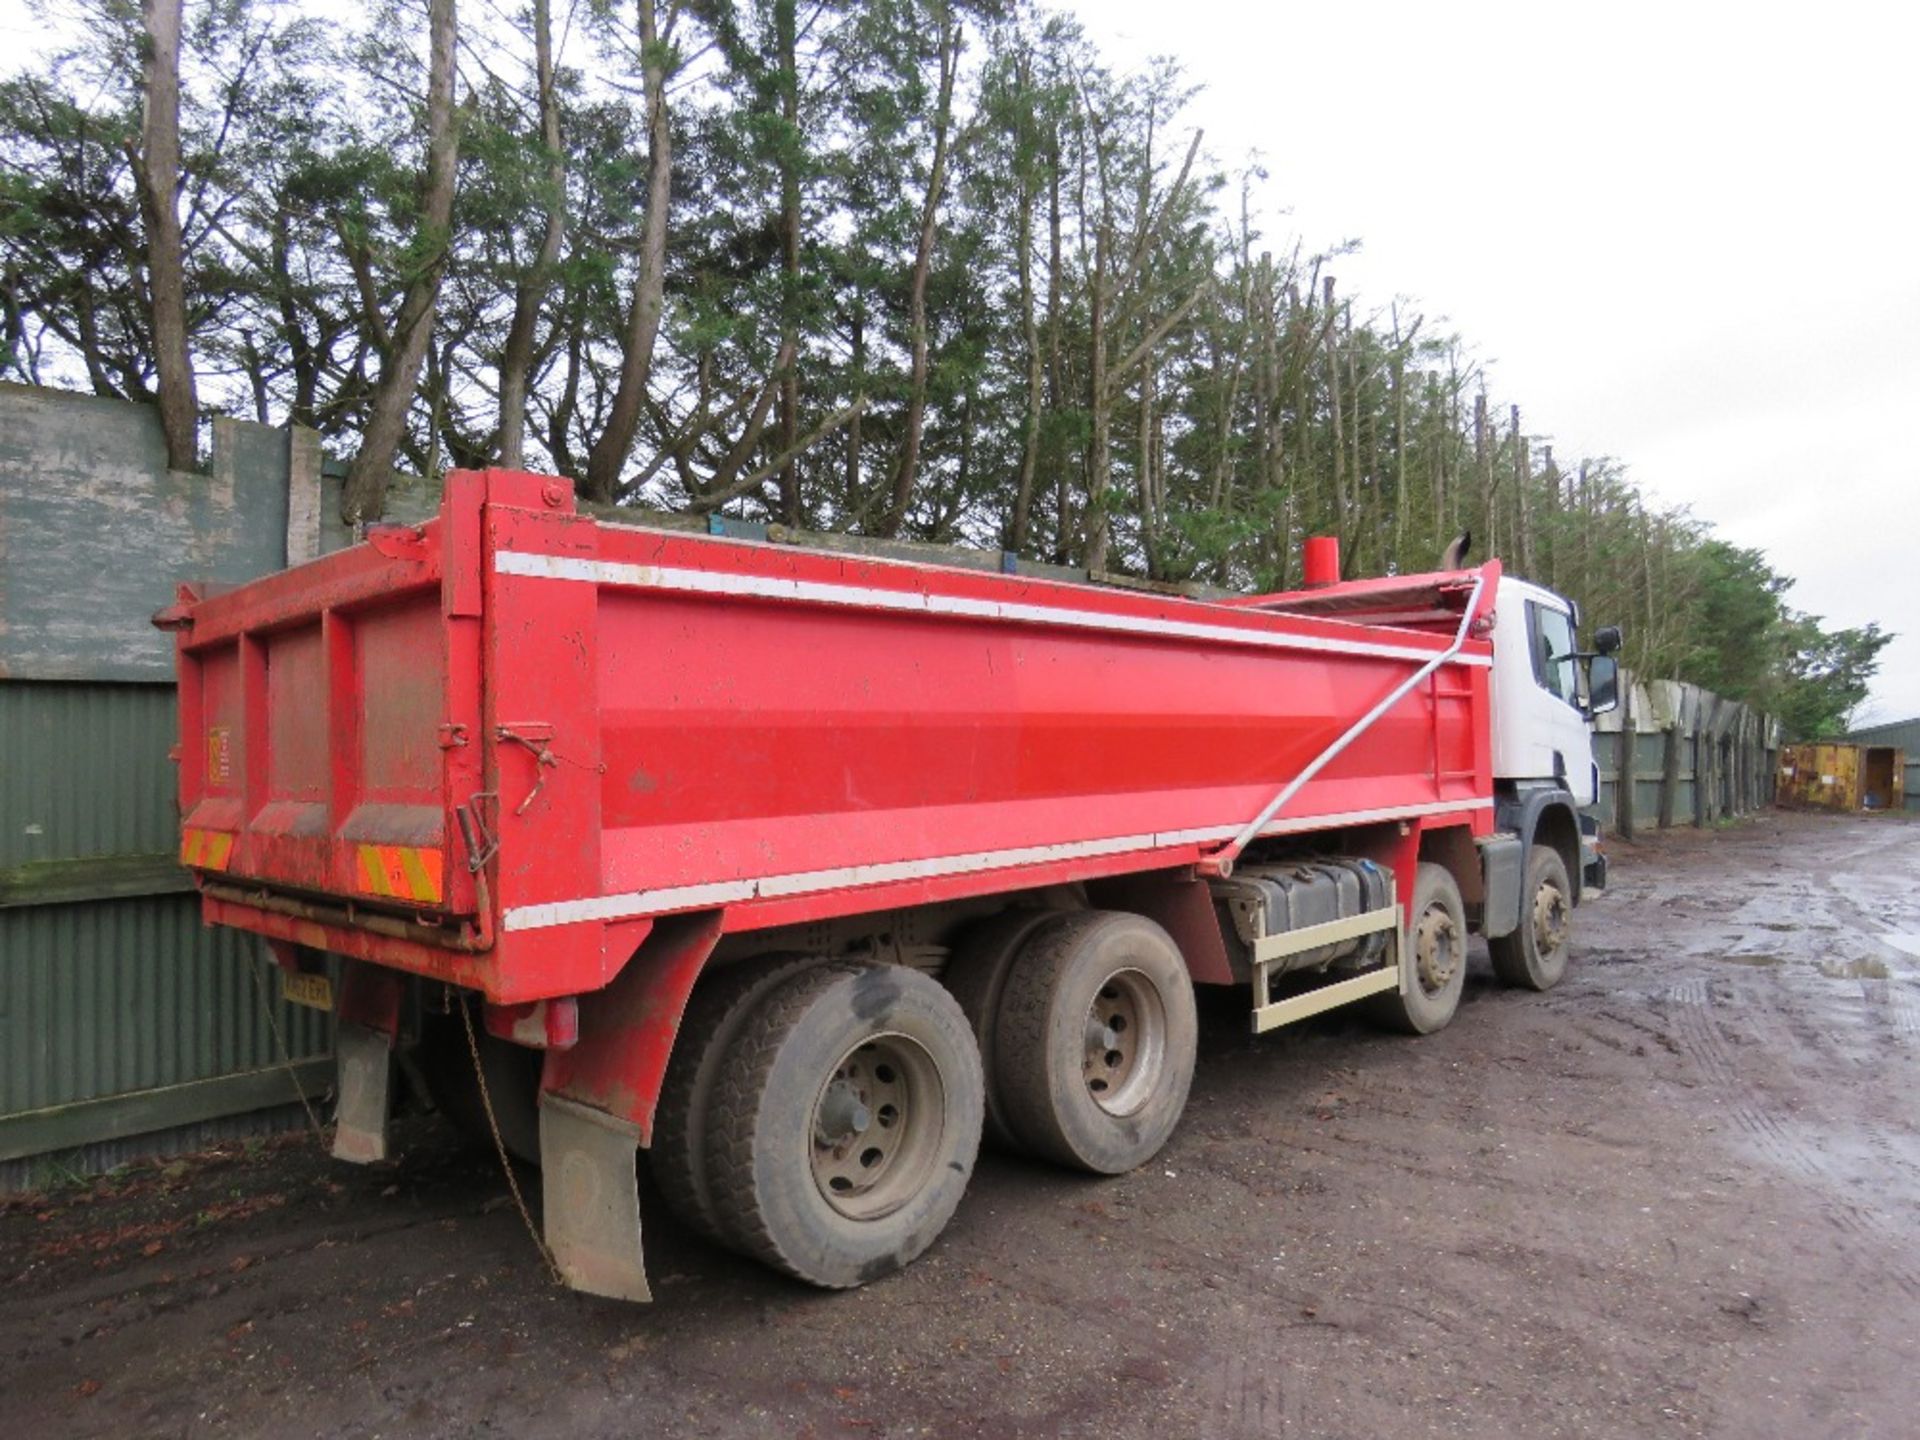 SCANIA P400 8X4 TIPPER LORRY REG:KM62 EHX. SEMI AUTO GEARBOX. 2013 REGISTERED. TESTED TILL MARCH 202 - Image 3 of 12